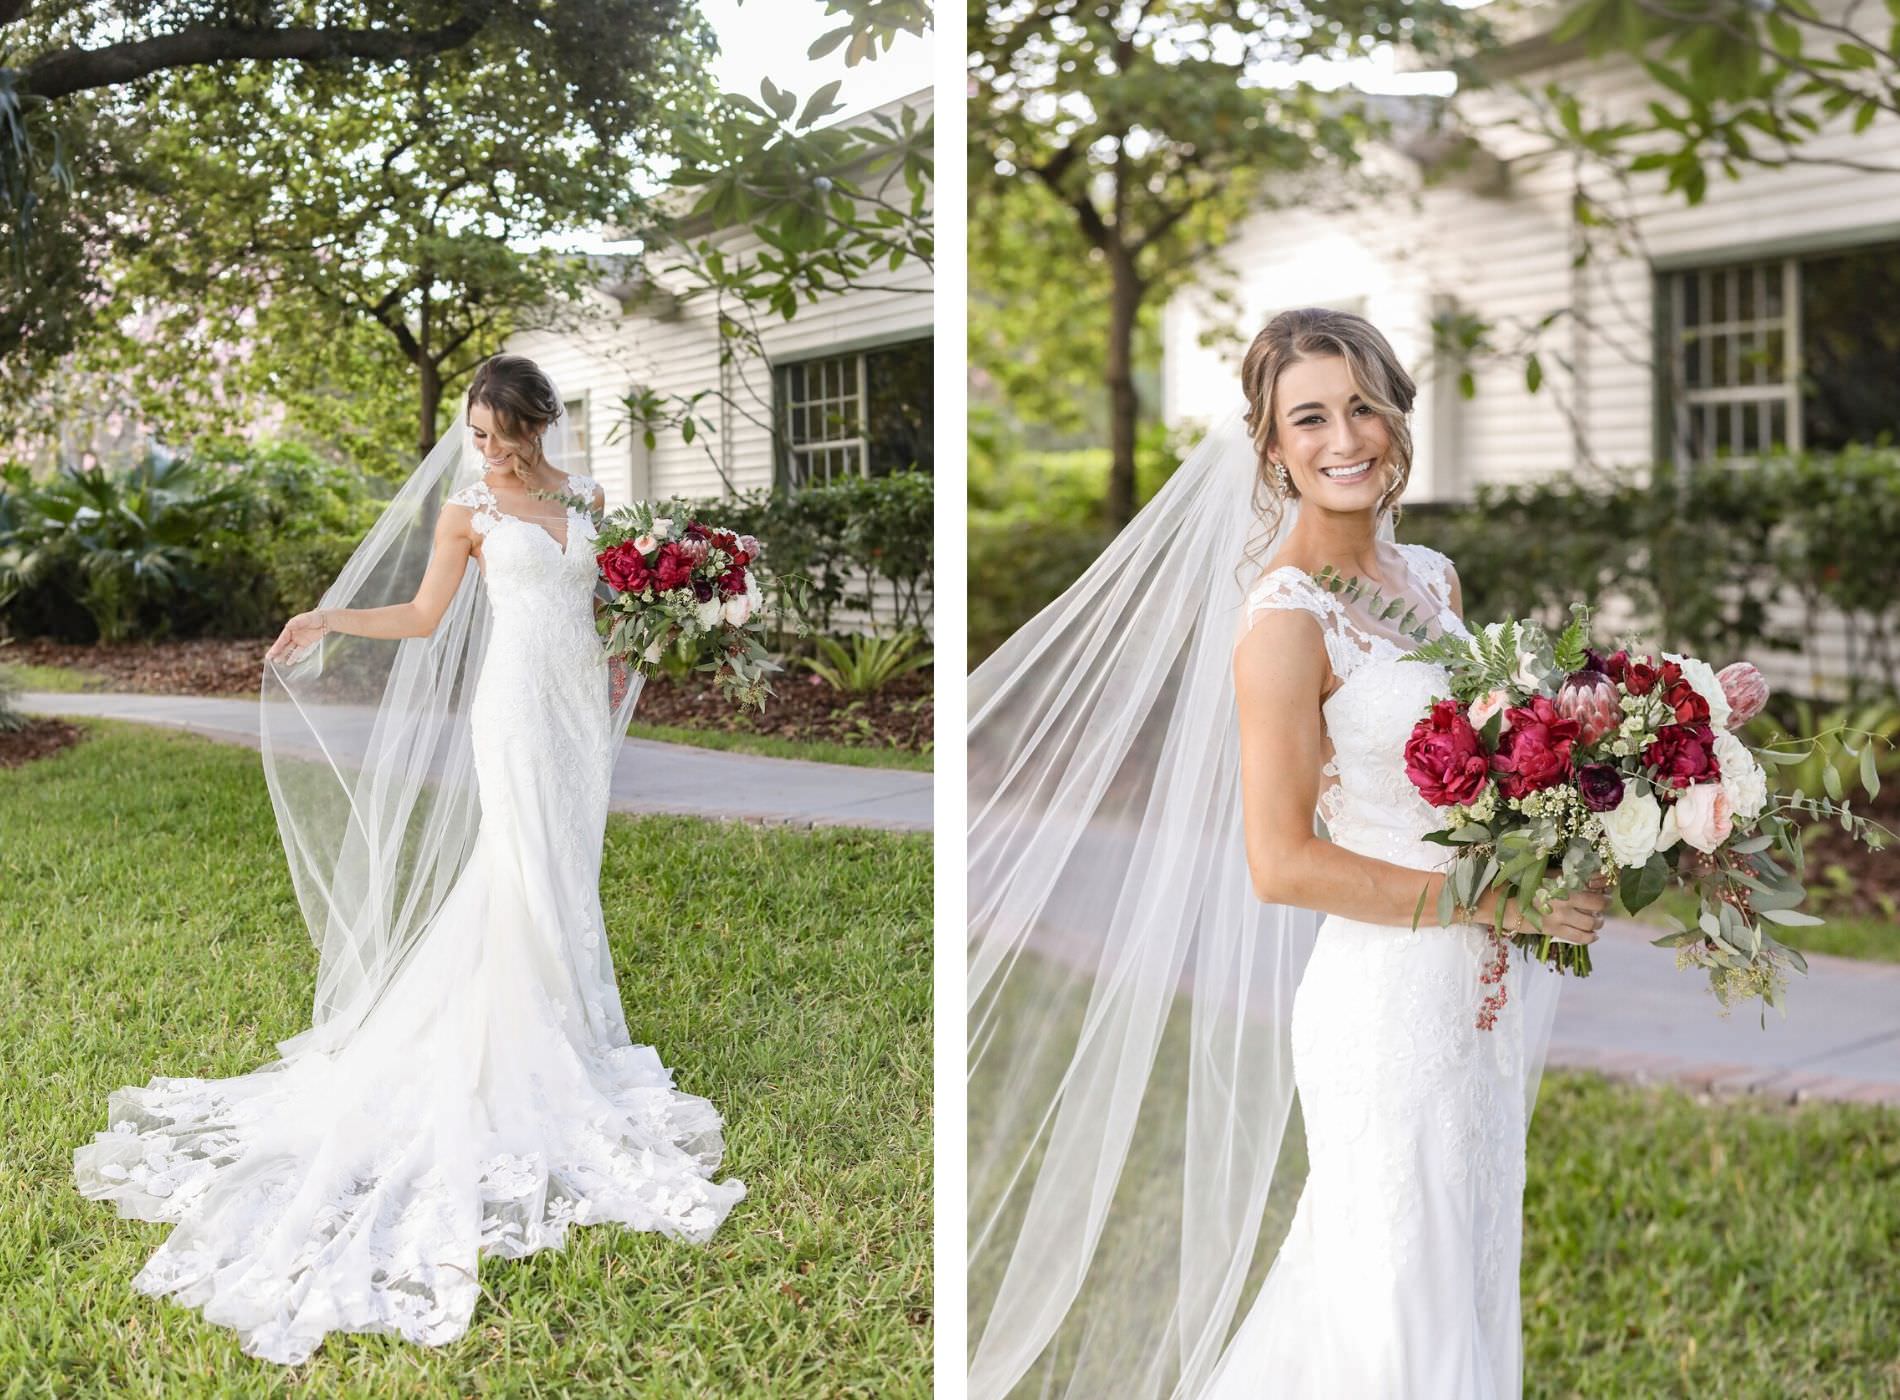 Tampa Bride in Lace and Illusion Neckline with Capsleeves Wedding Dress and Full Length Veil Holding Red, Blush Pink and Ivory Roses with Greenery Floral Bouquet | Wedding Photographer Lifelong Photography Studio | Wedding Planner Blue Skies Weddings and Events